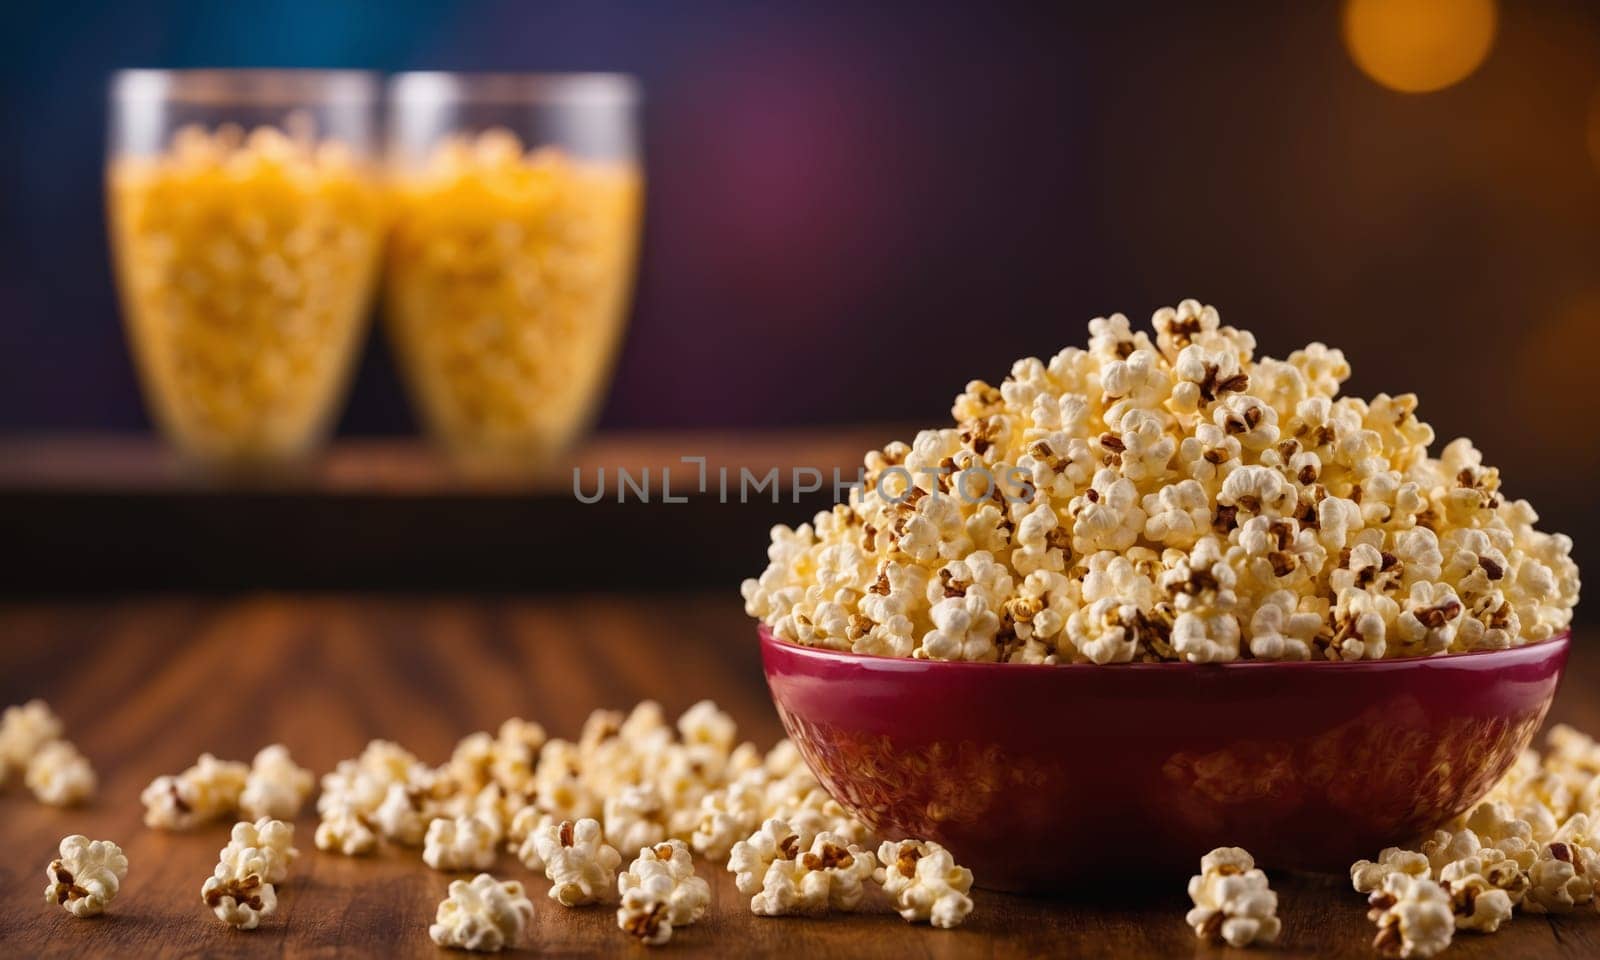 Kettle corn popcorn on a table, a staple food and superfood by Andre1ns